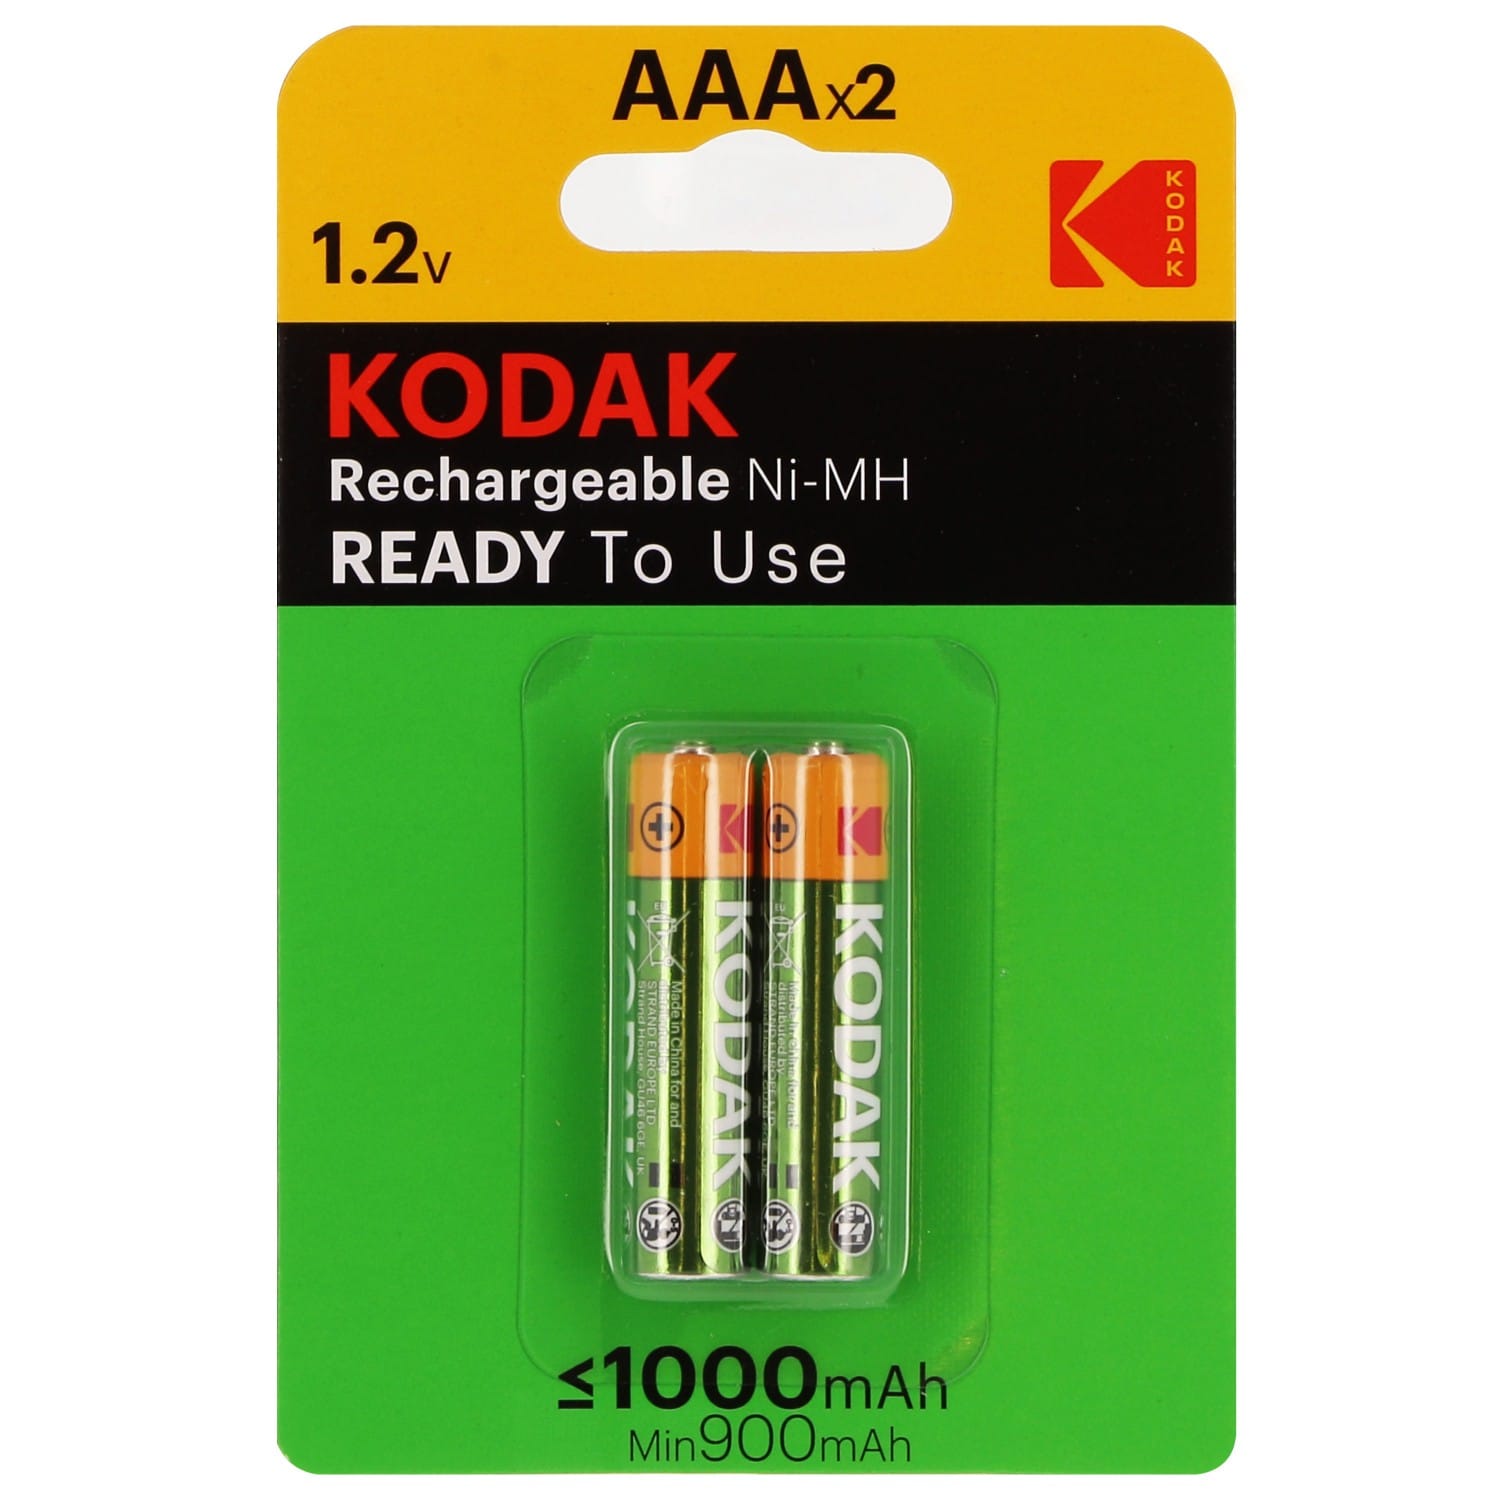 4 piles rechargeables AAA / HR03 1.2V 1000MAH